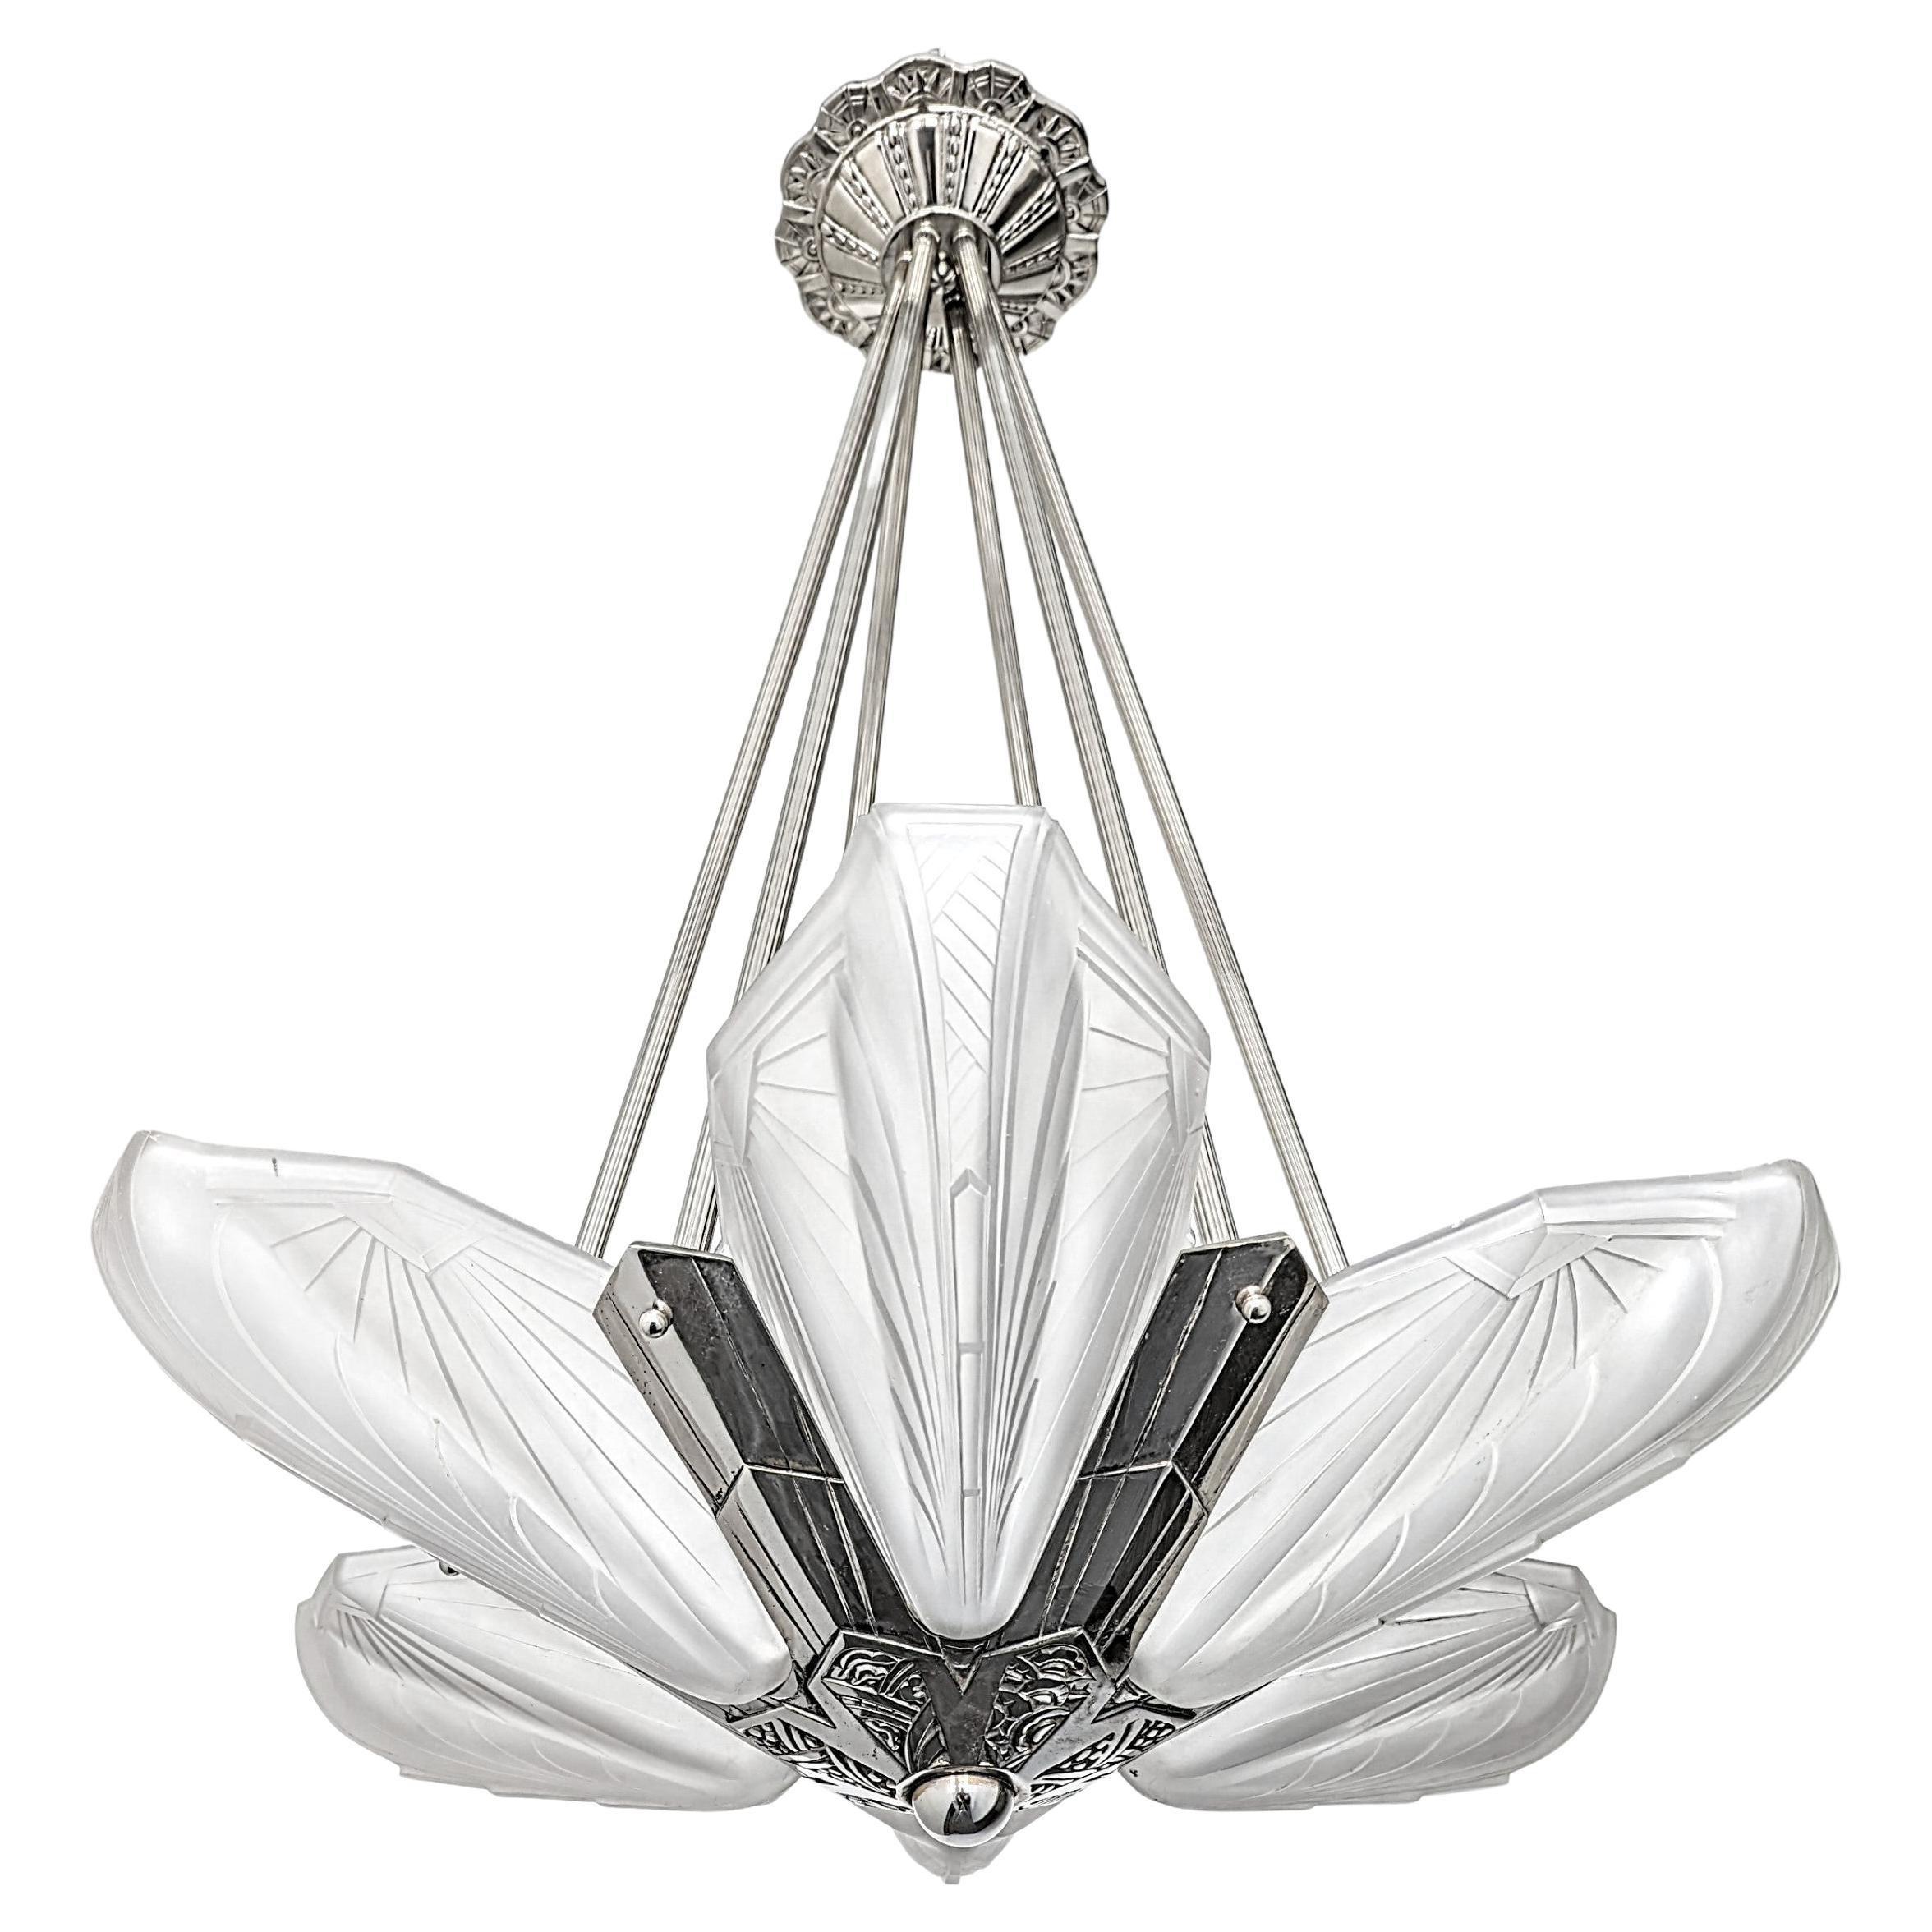 French Art Deco chandelier was created by the French Artist 